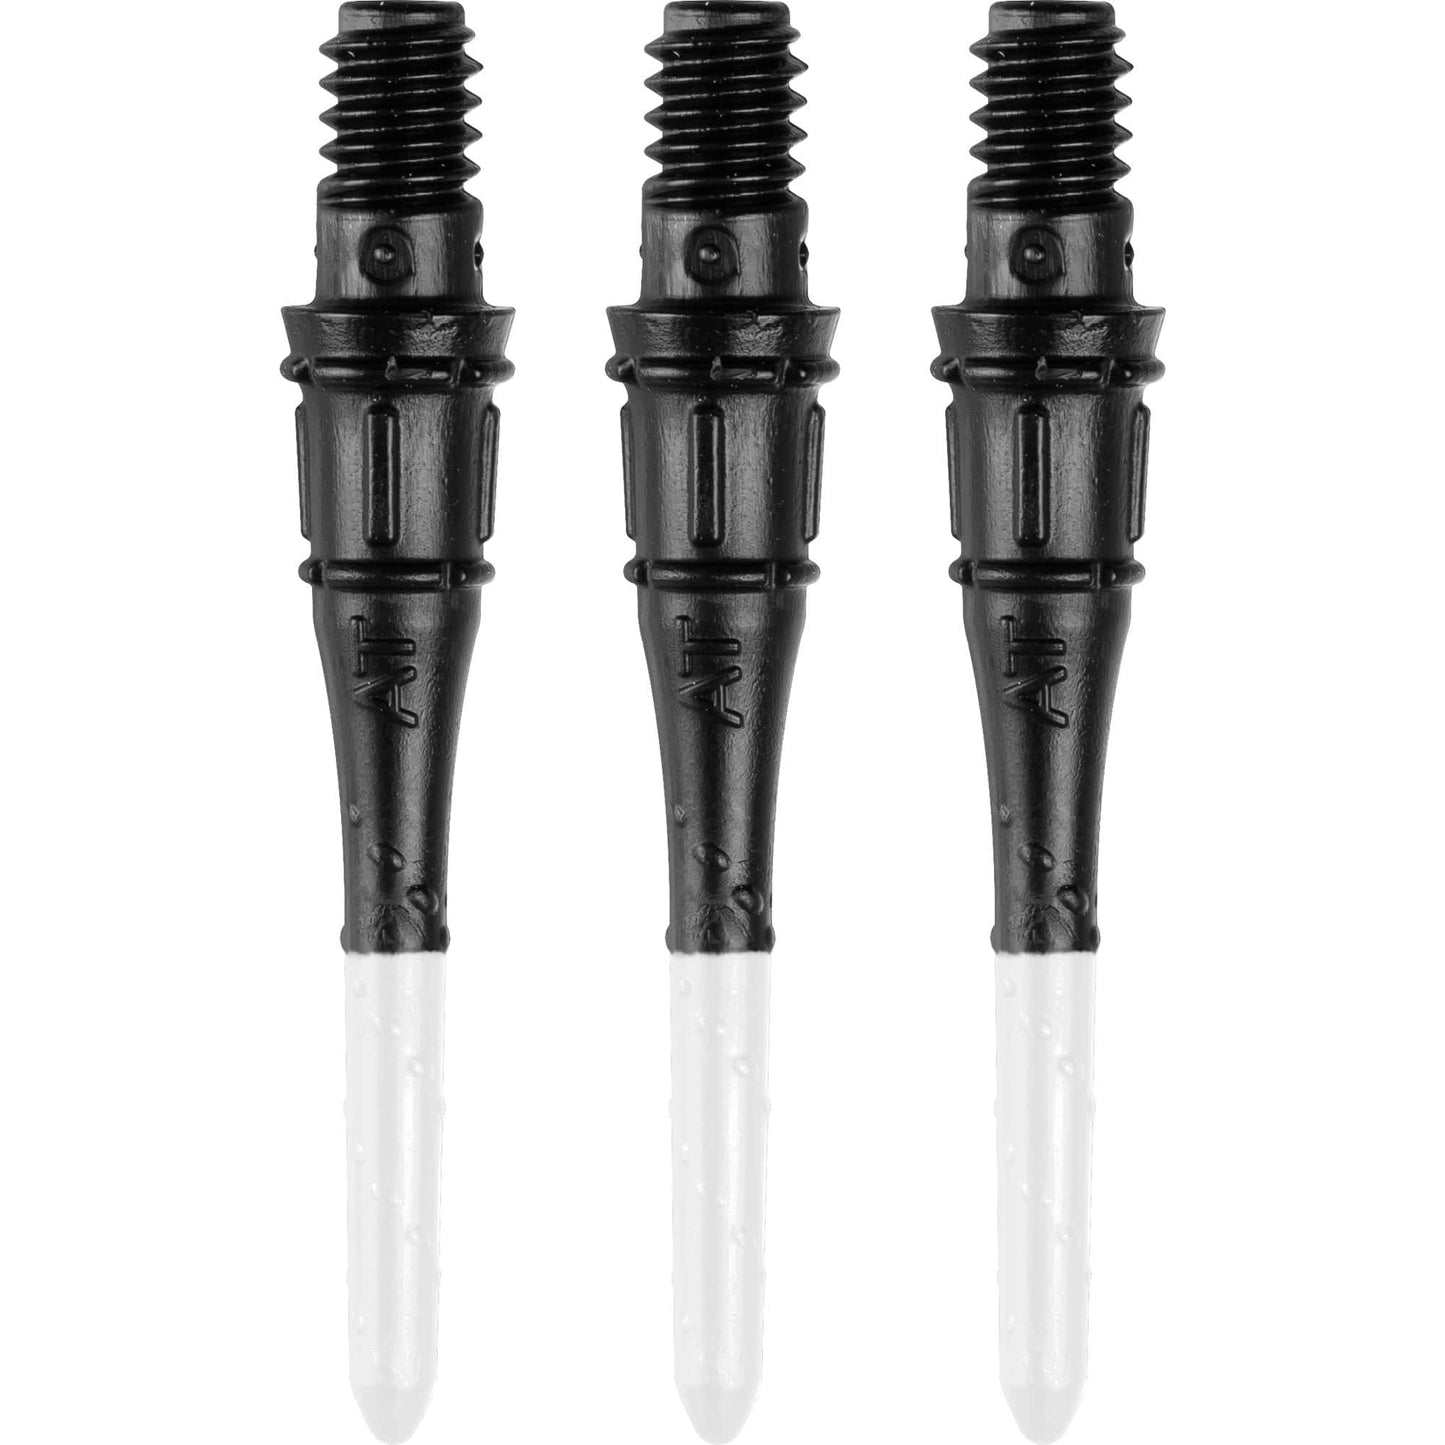 L-Style Premium Lippoints Two Tone - Spare Tips - Lip Points - 2ba - Pack 30 Black